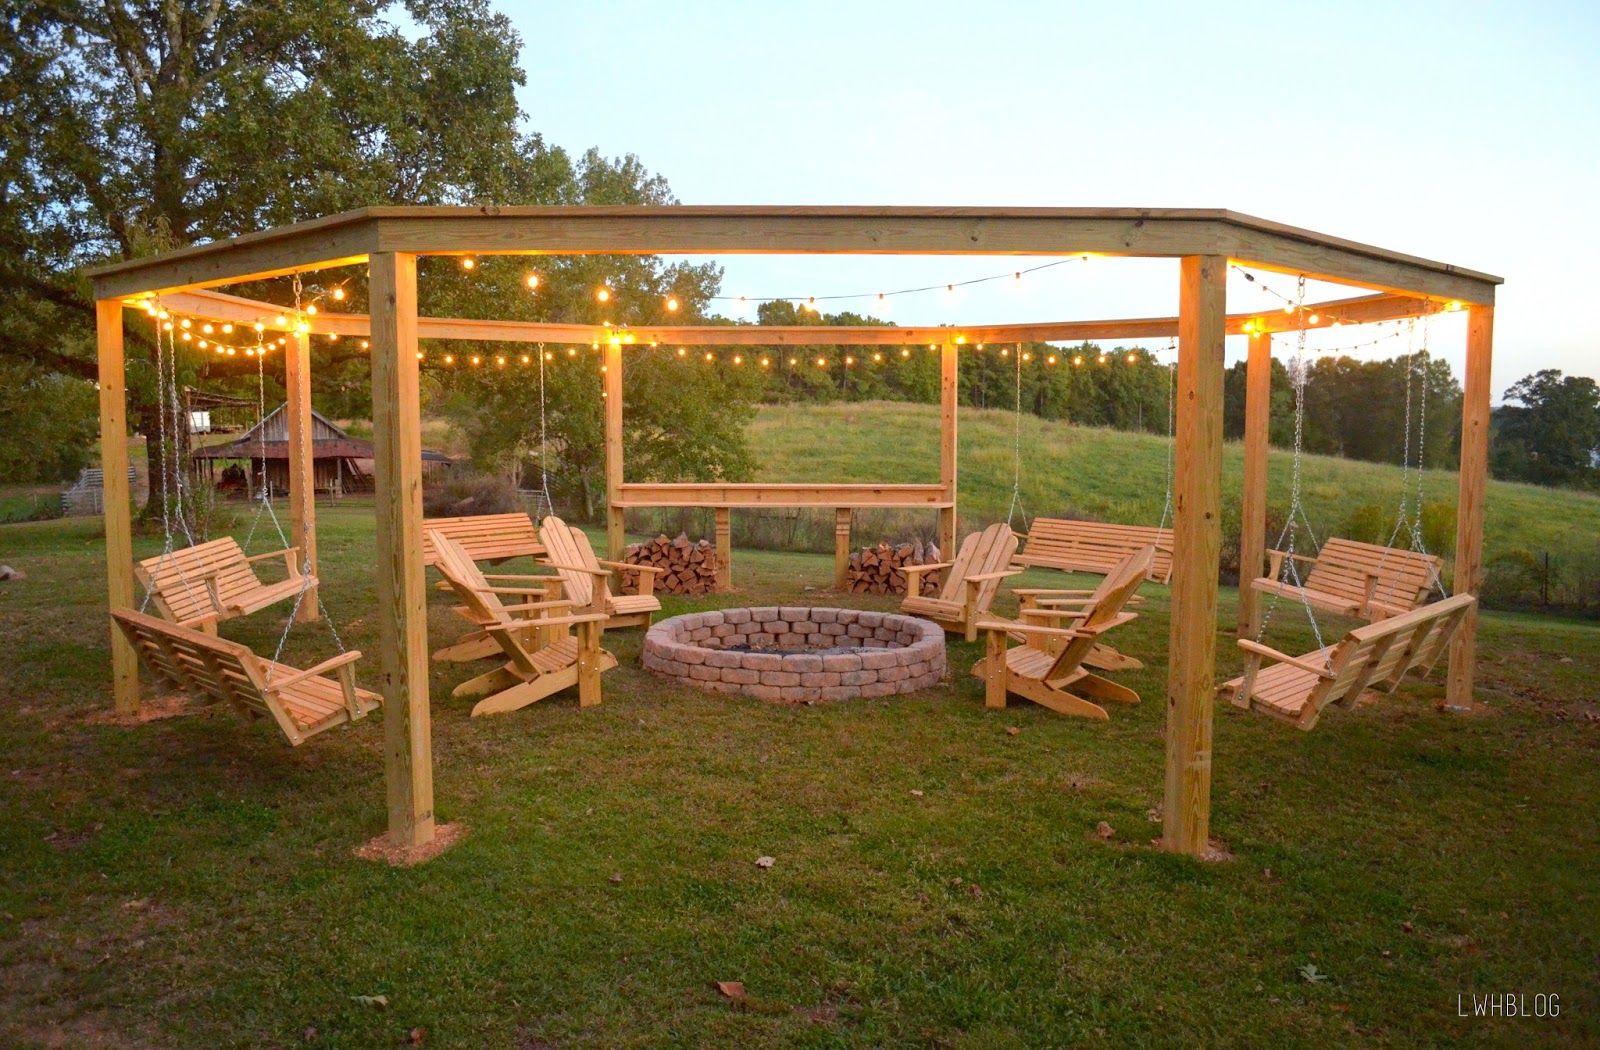 This Diy Backyard Pergola Is The, Can I Put A Fire Pit Under Gazebo